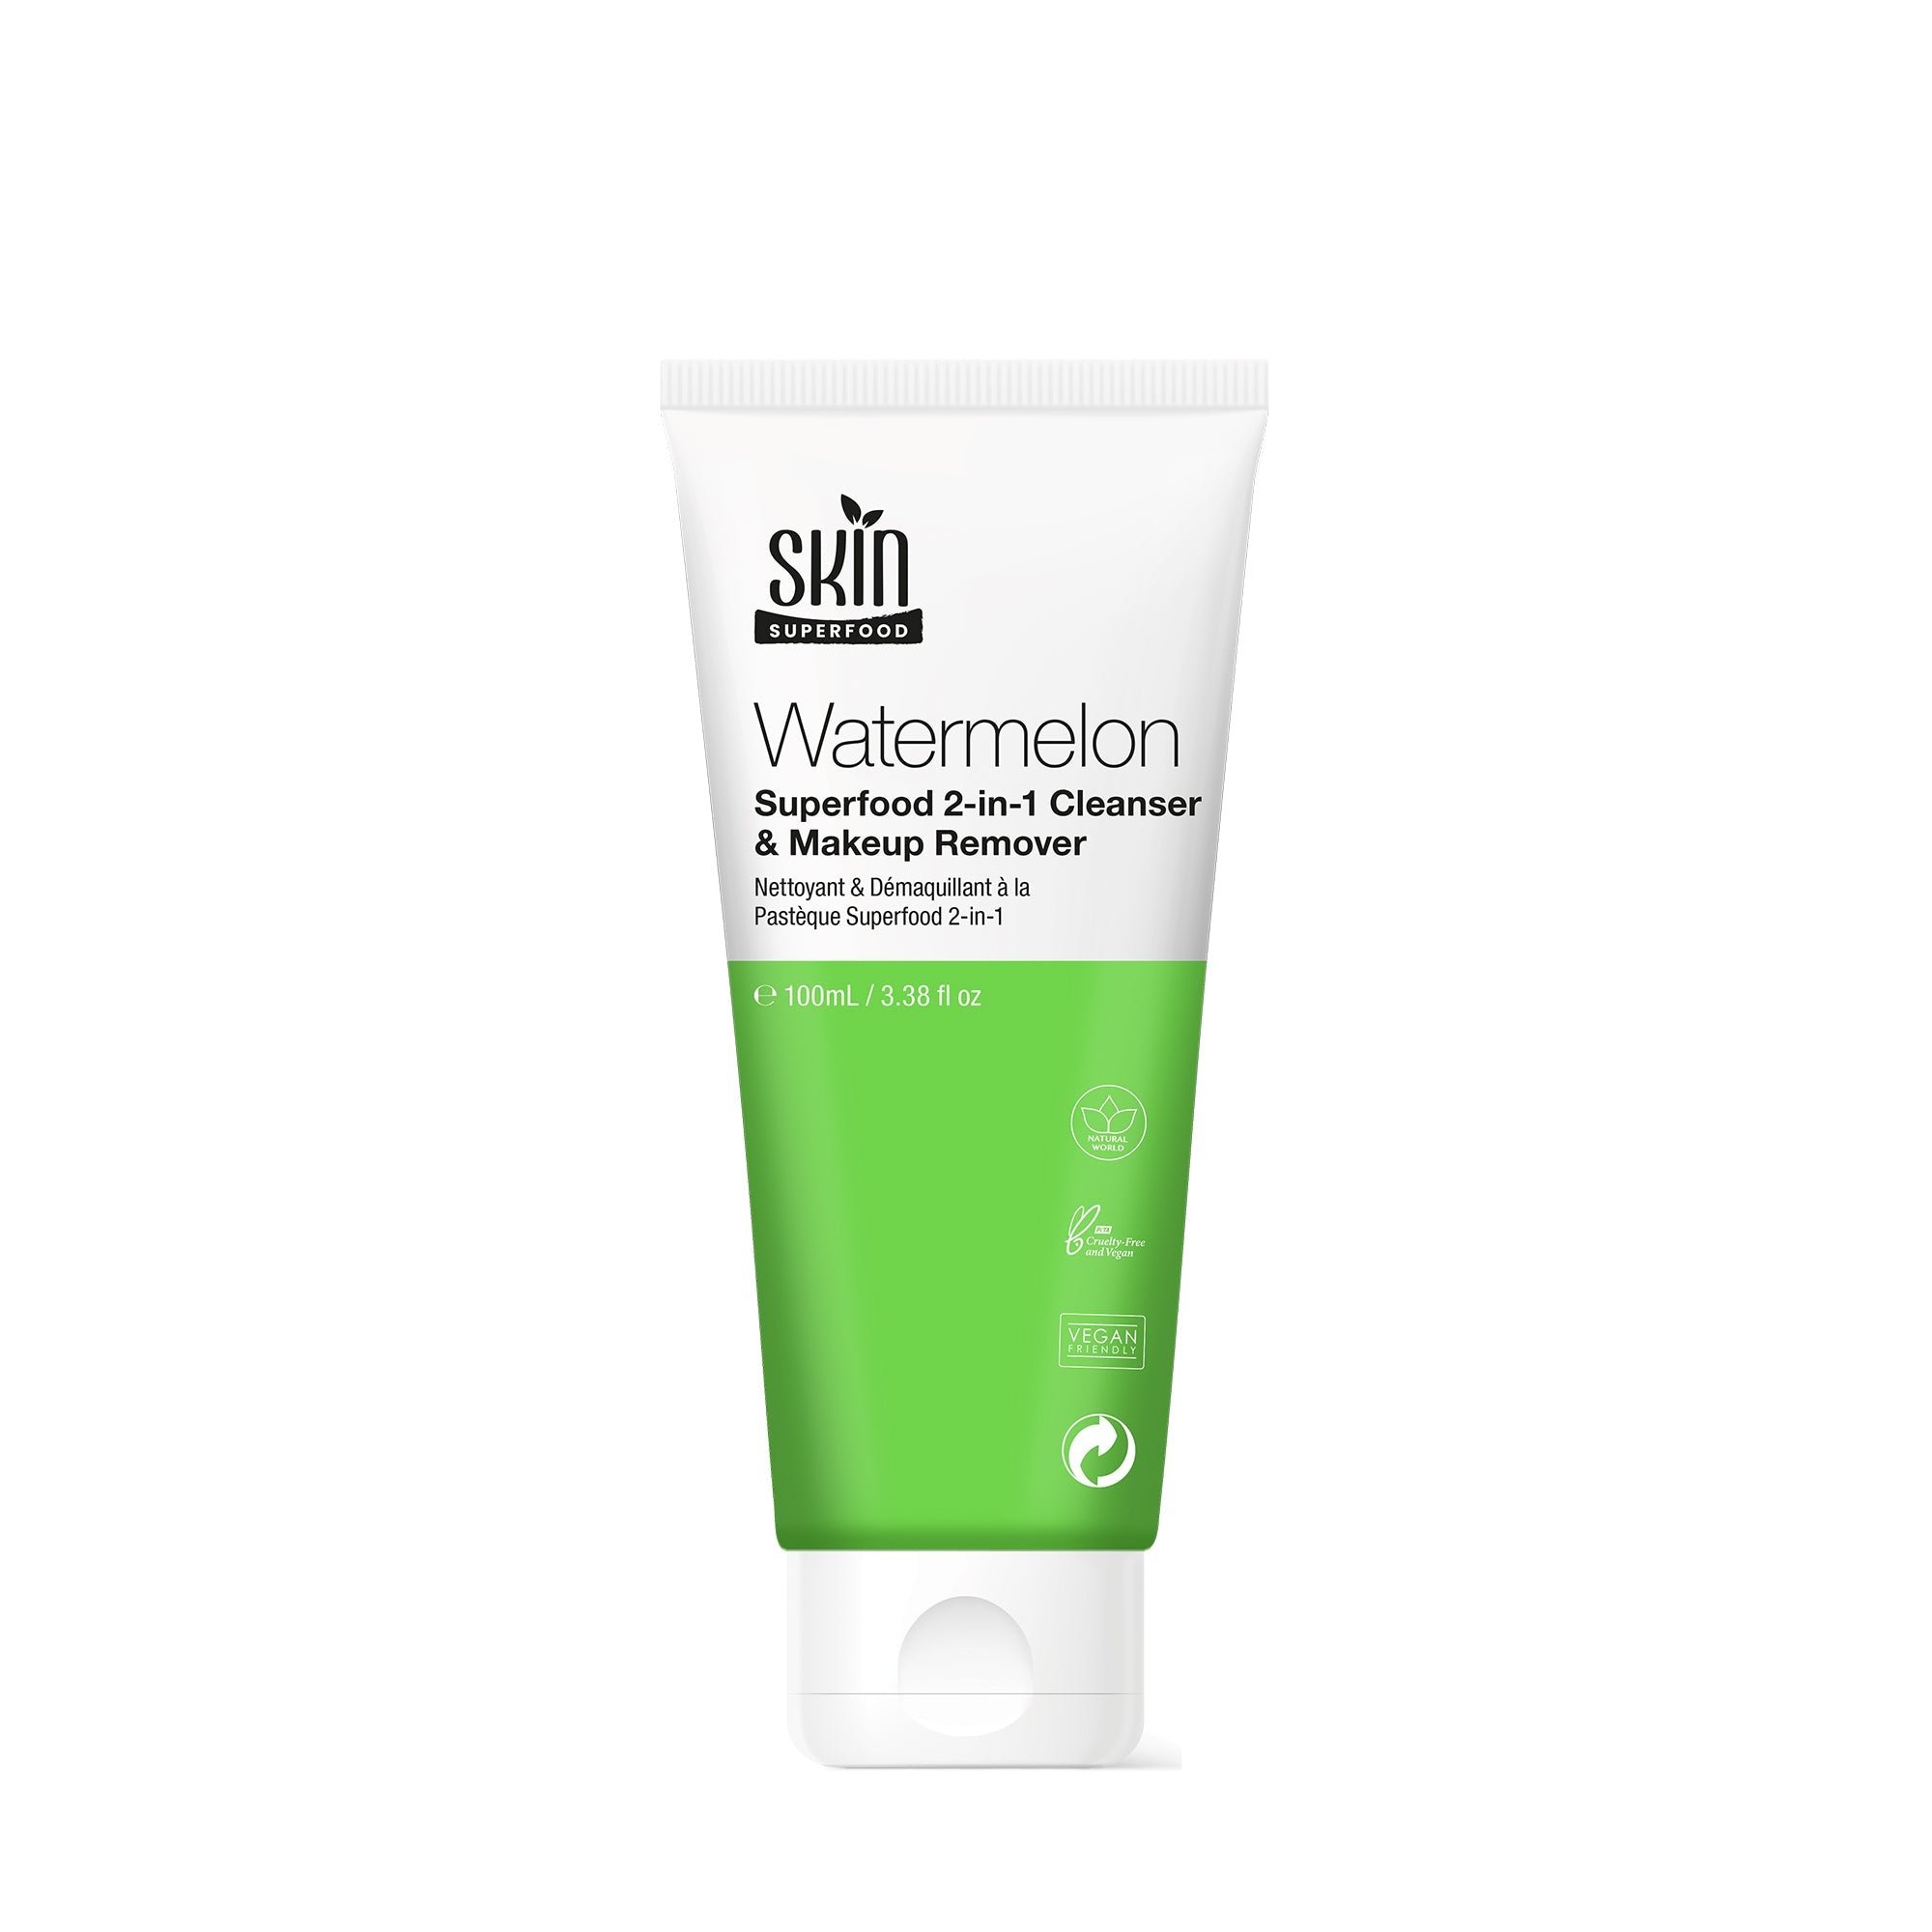 Watermelon Superfood 2-in-1 Cleanser & Makeup Remover 100ml